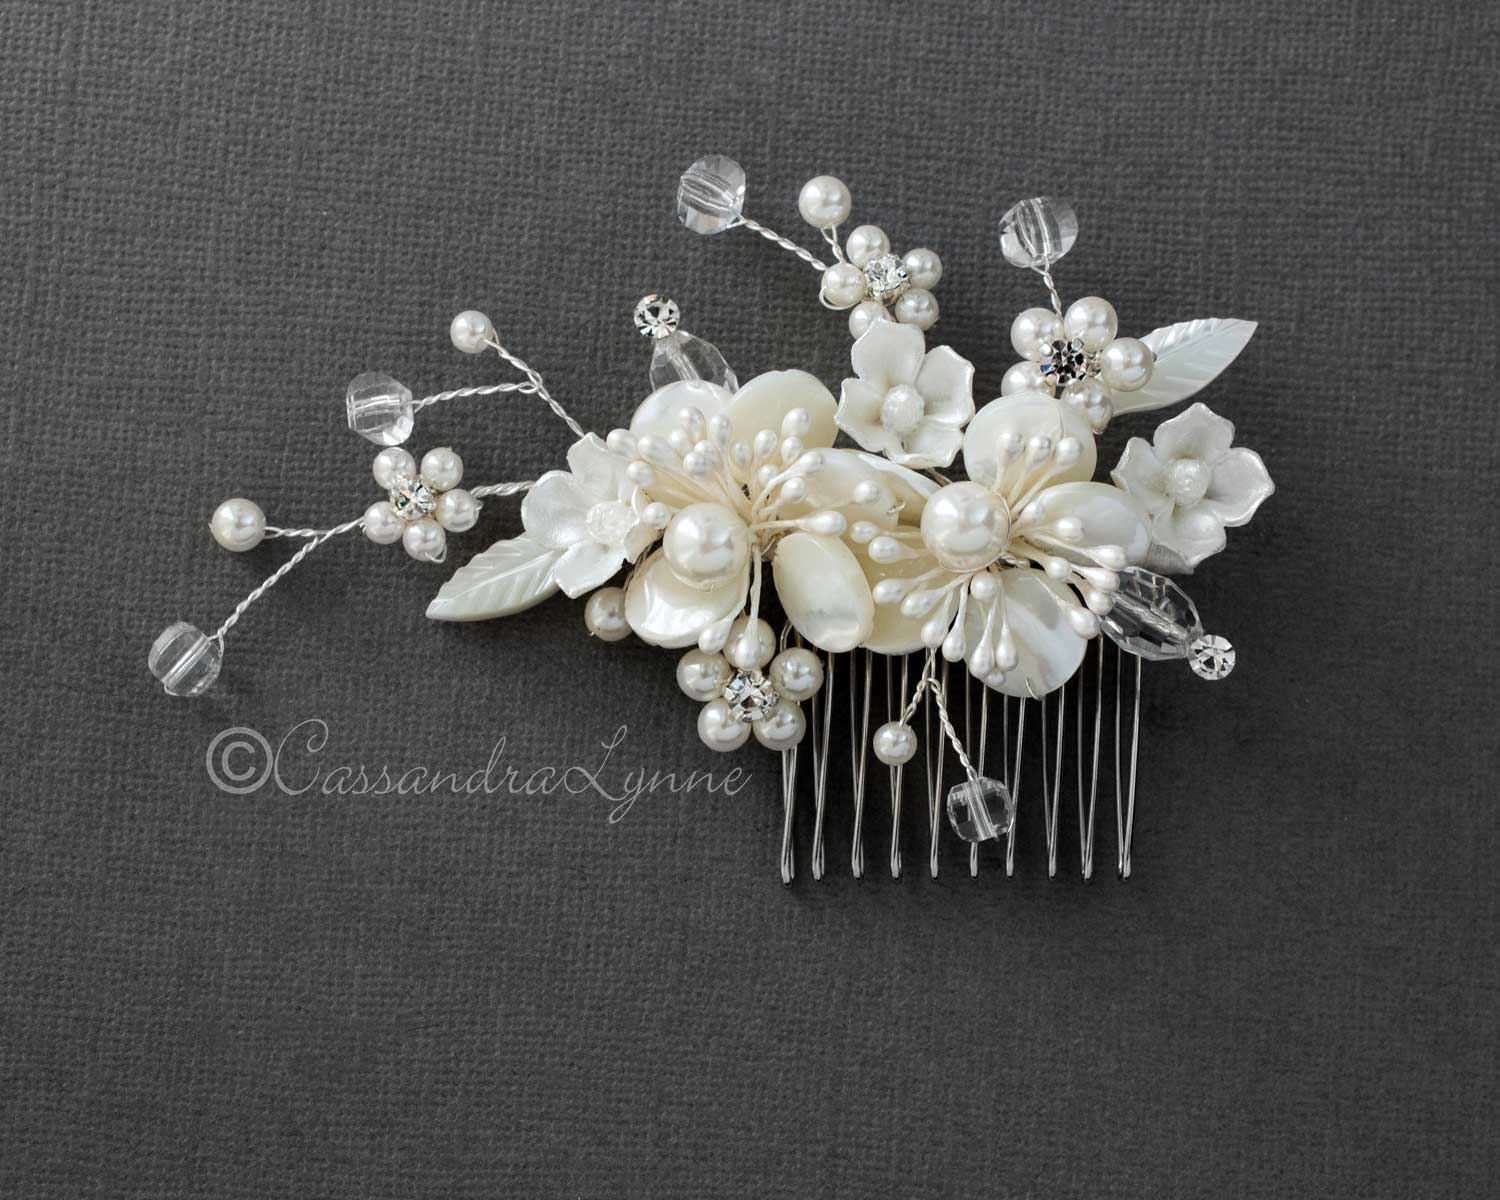 Beach Wedding Comb of Shell Flowers and Crystal - Cassandra Lynne